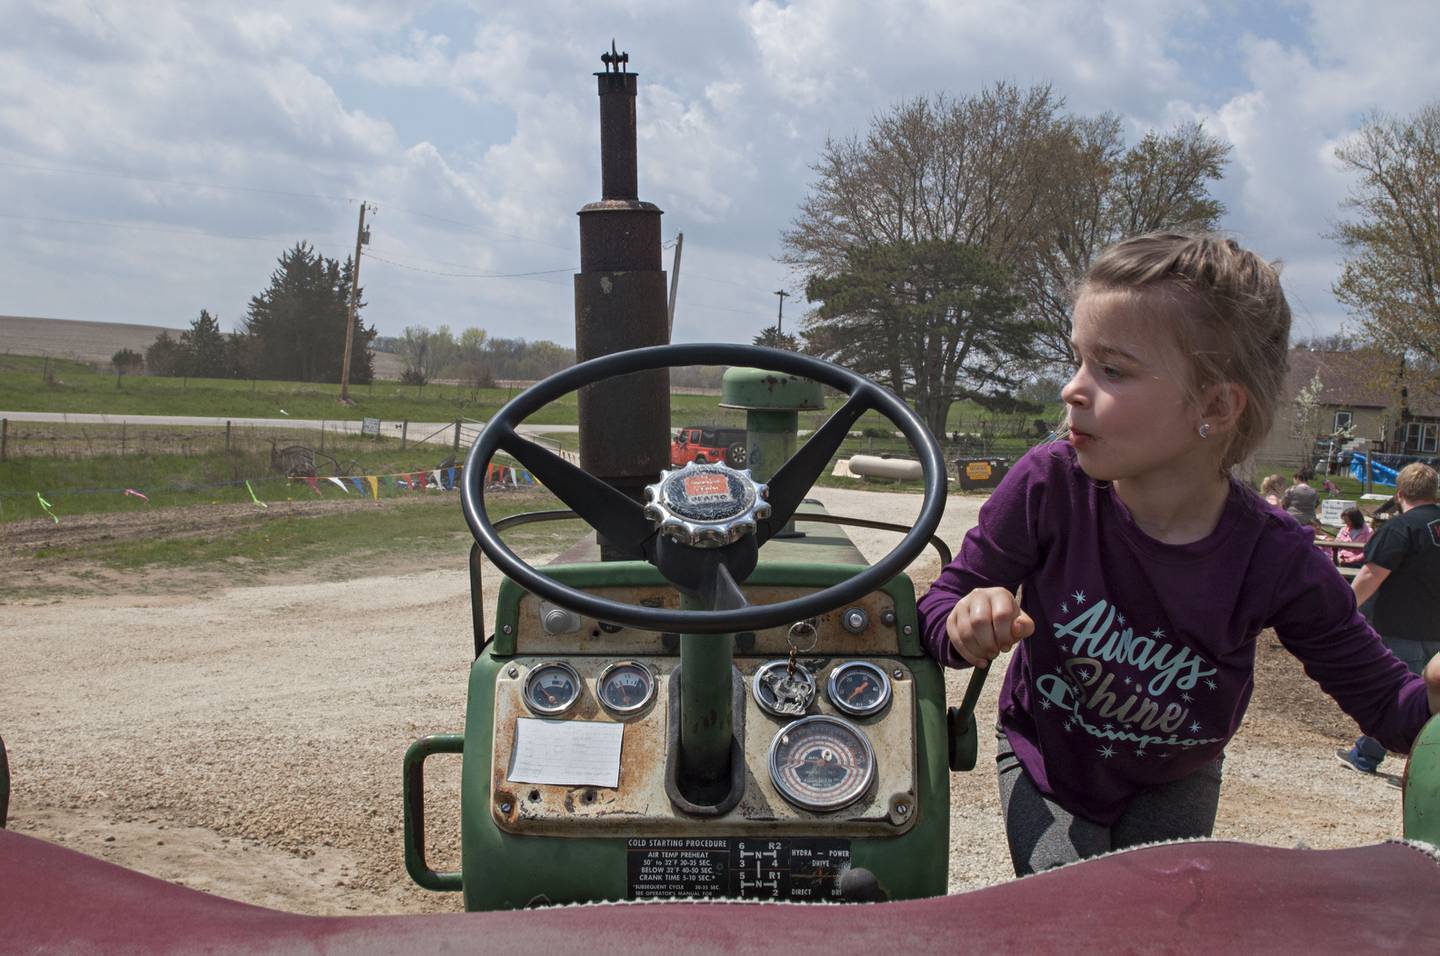 Annalee King, 5, of Thomson climbs to the seat of a tractor Saturday while visiting the farm. Along with the animals, the farm had some equipment on display, crafts for sale and food.